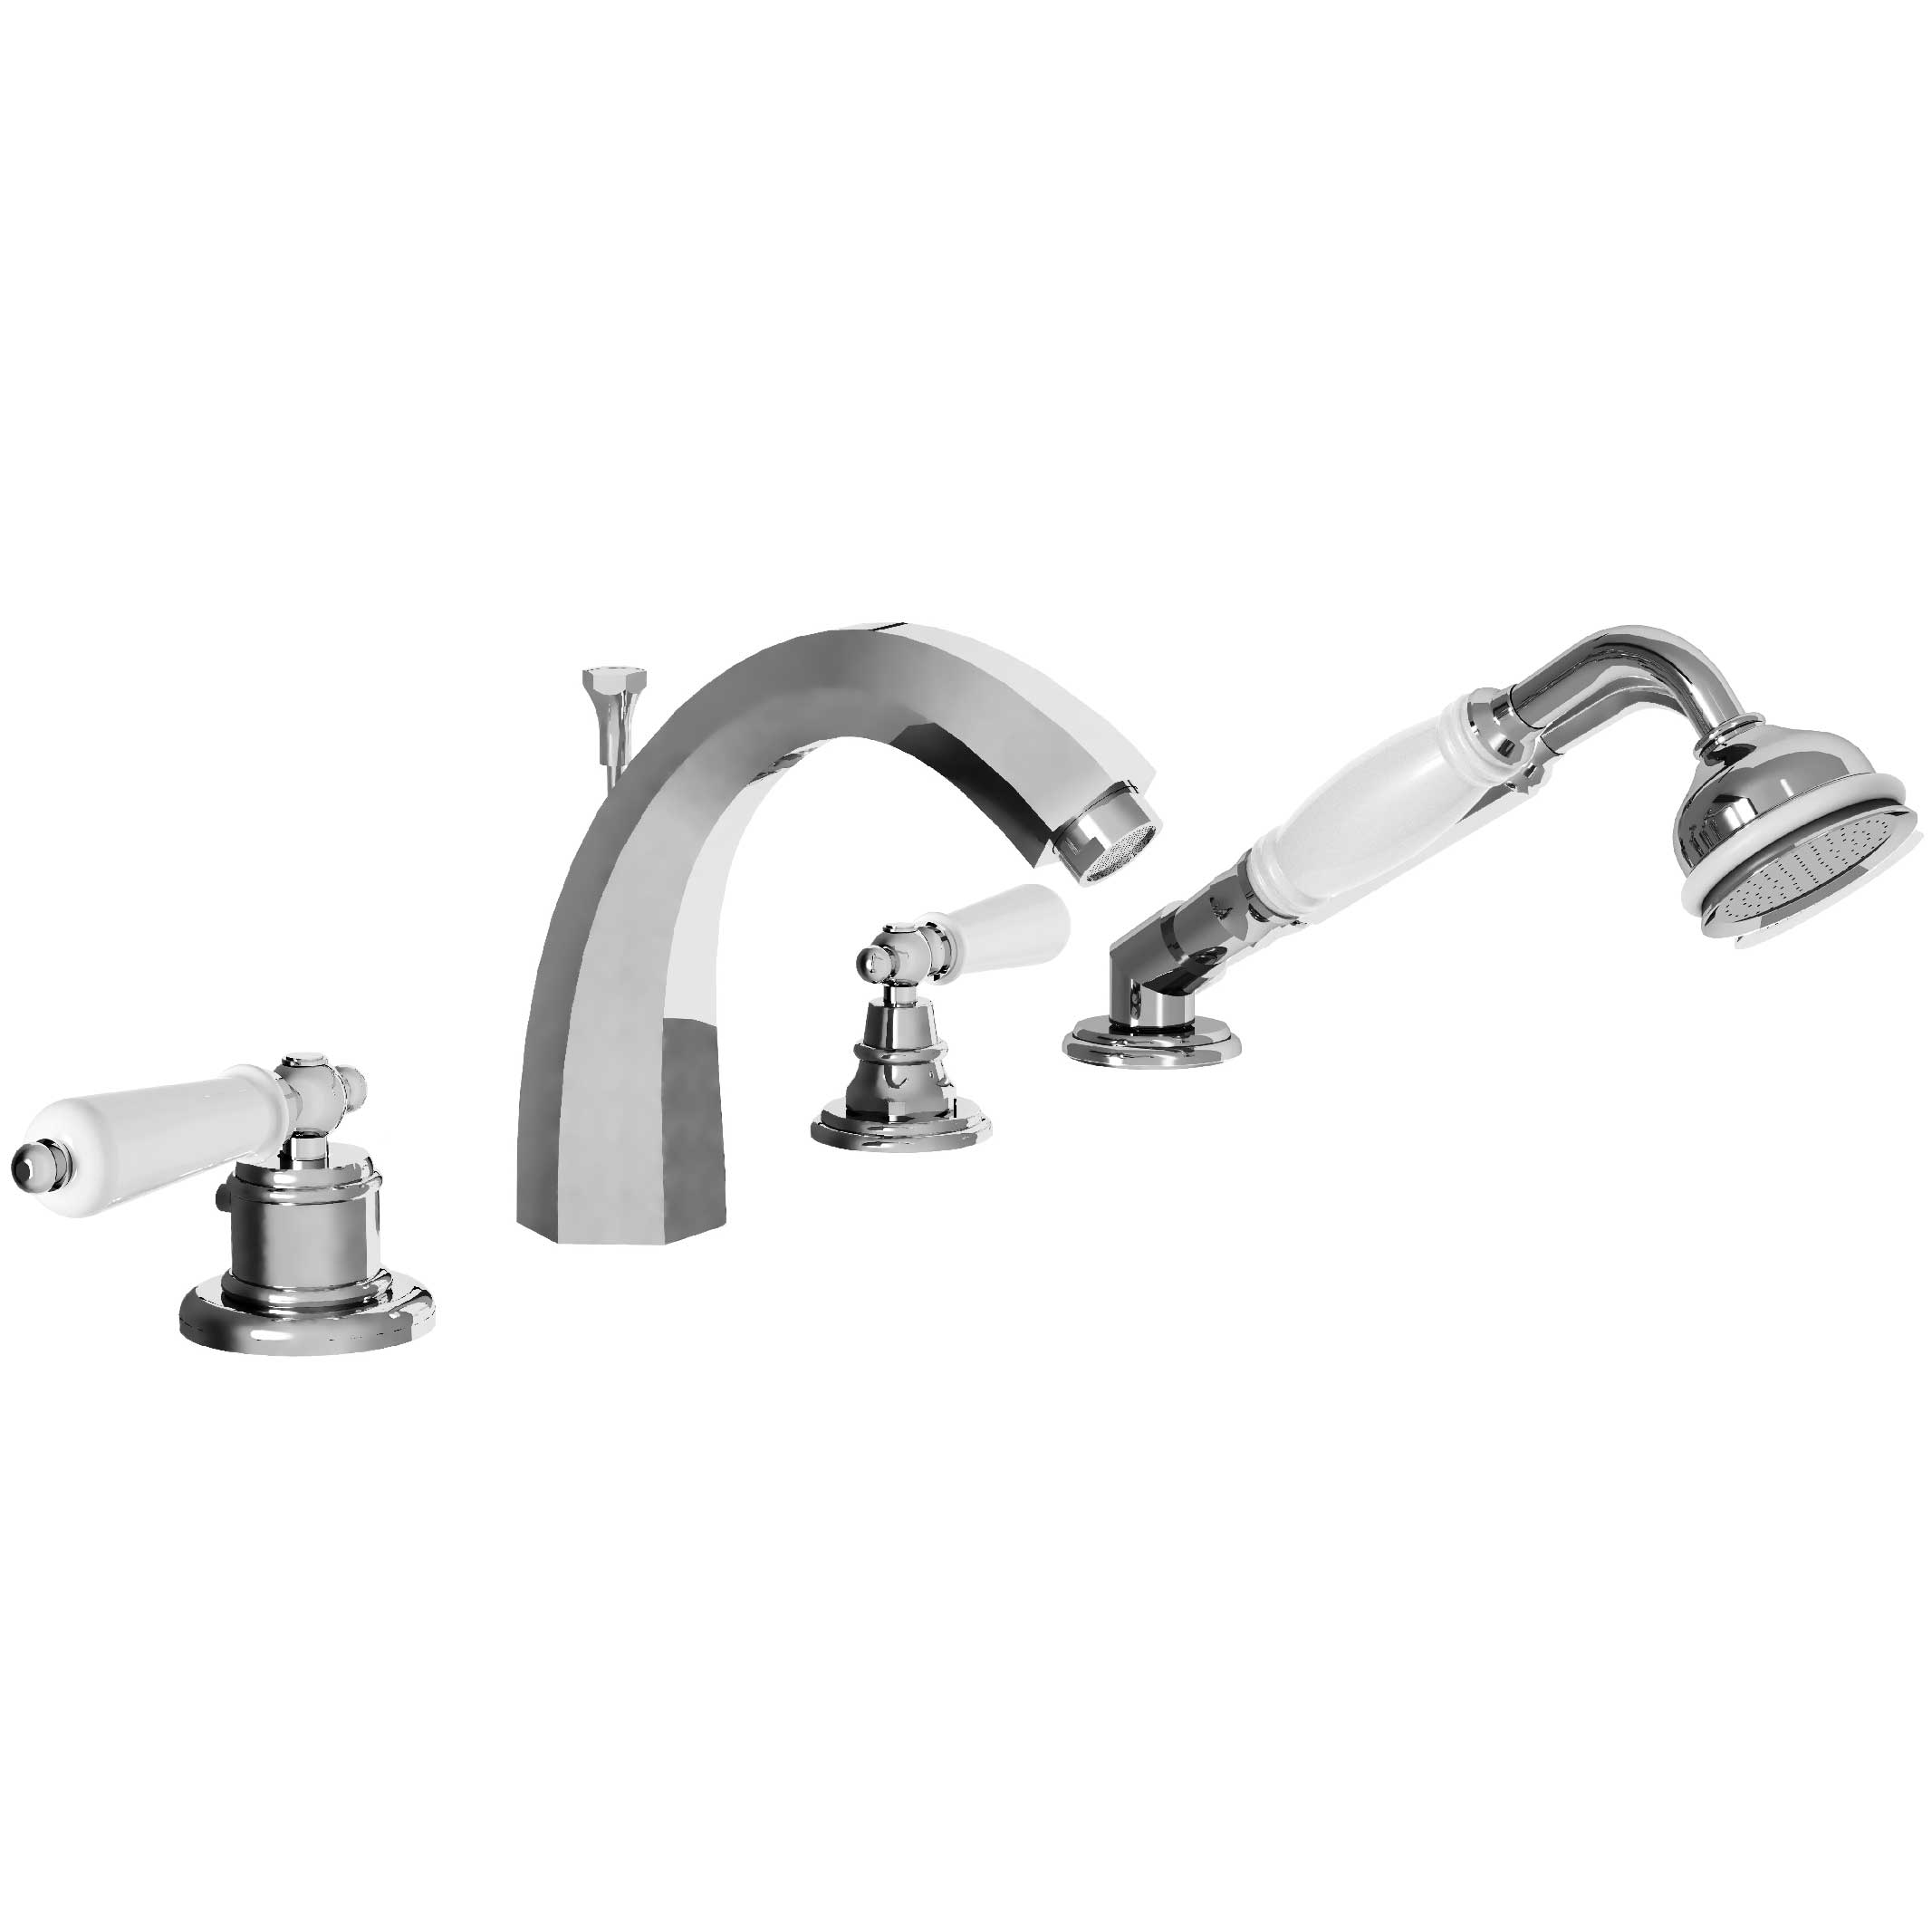 M32-3304TH 4-hole bath and shower thermo. mixer, high spout